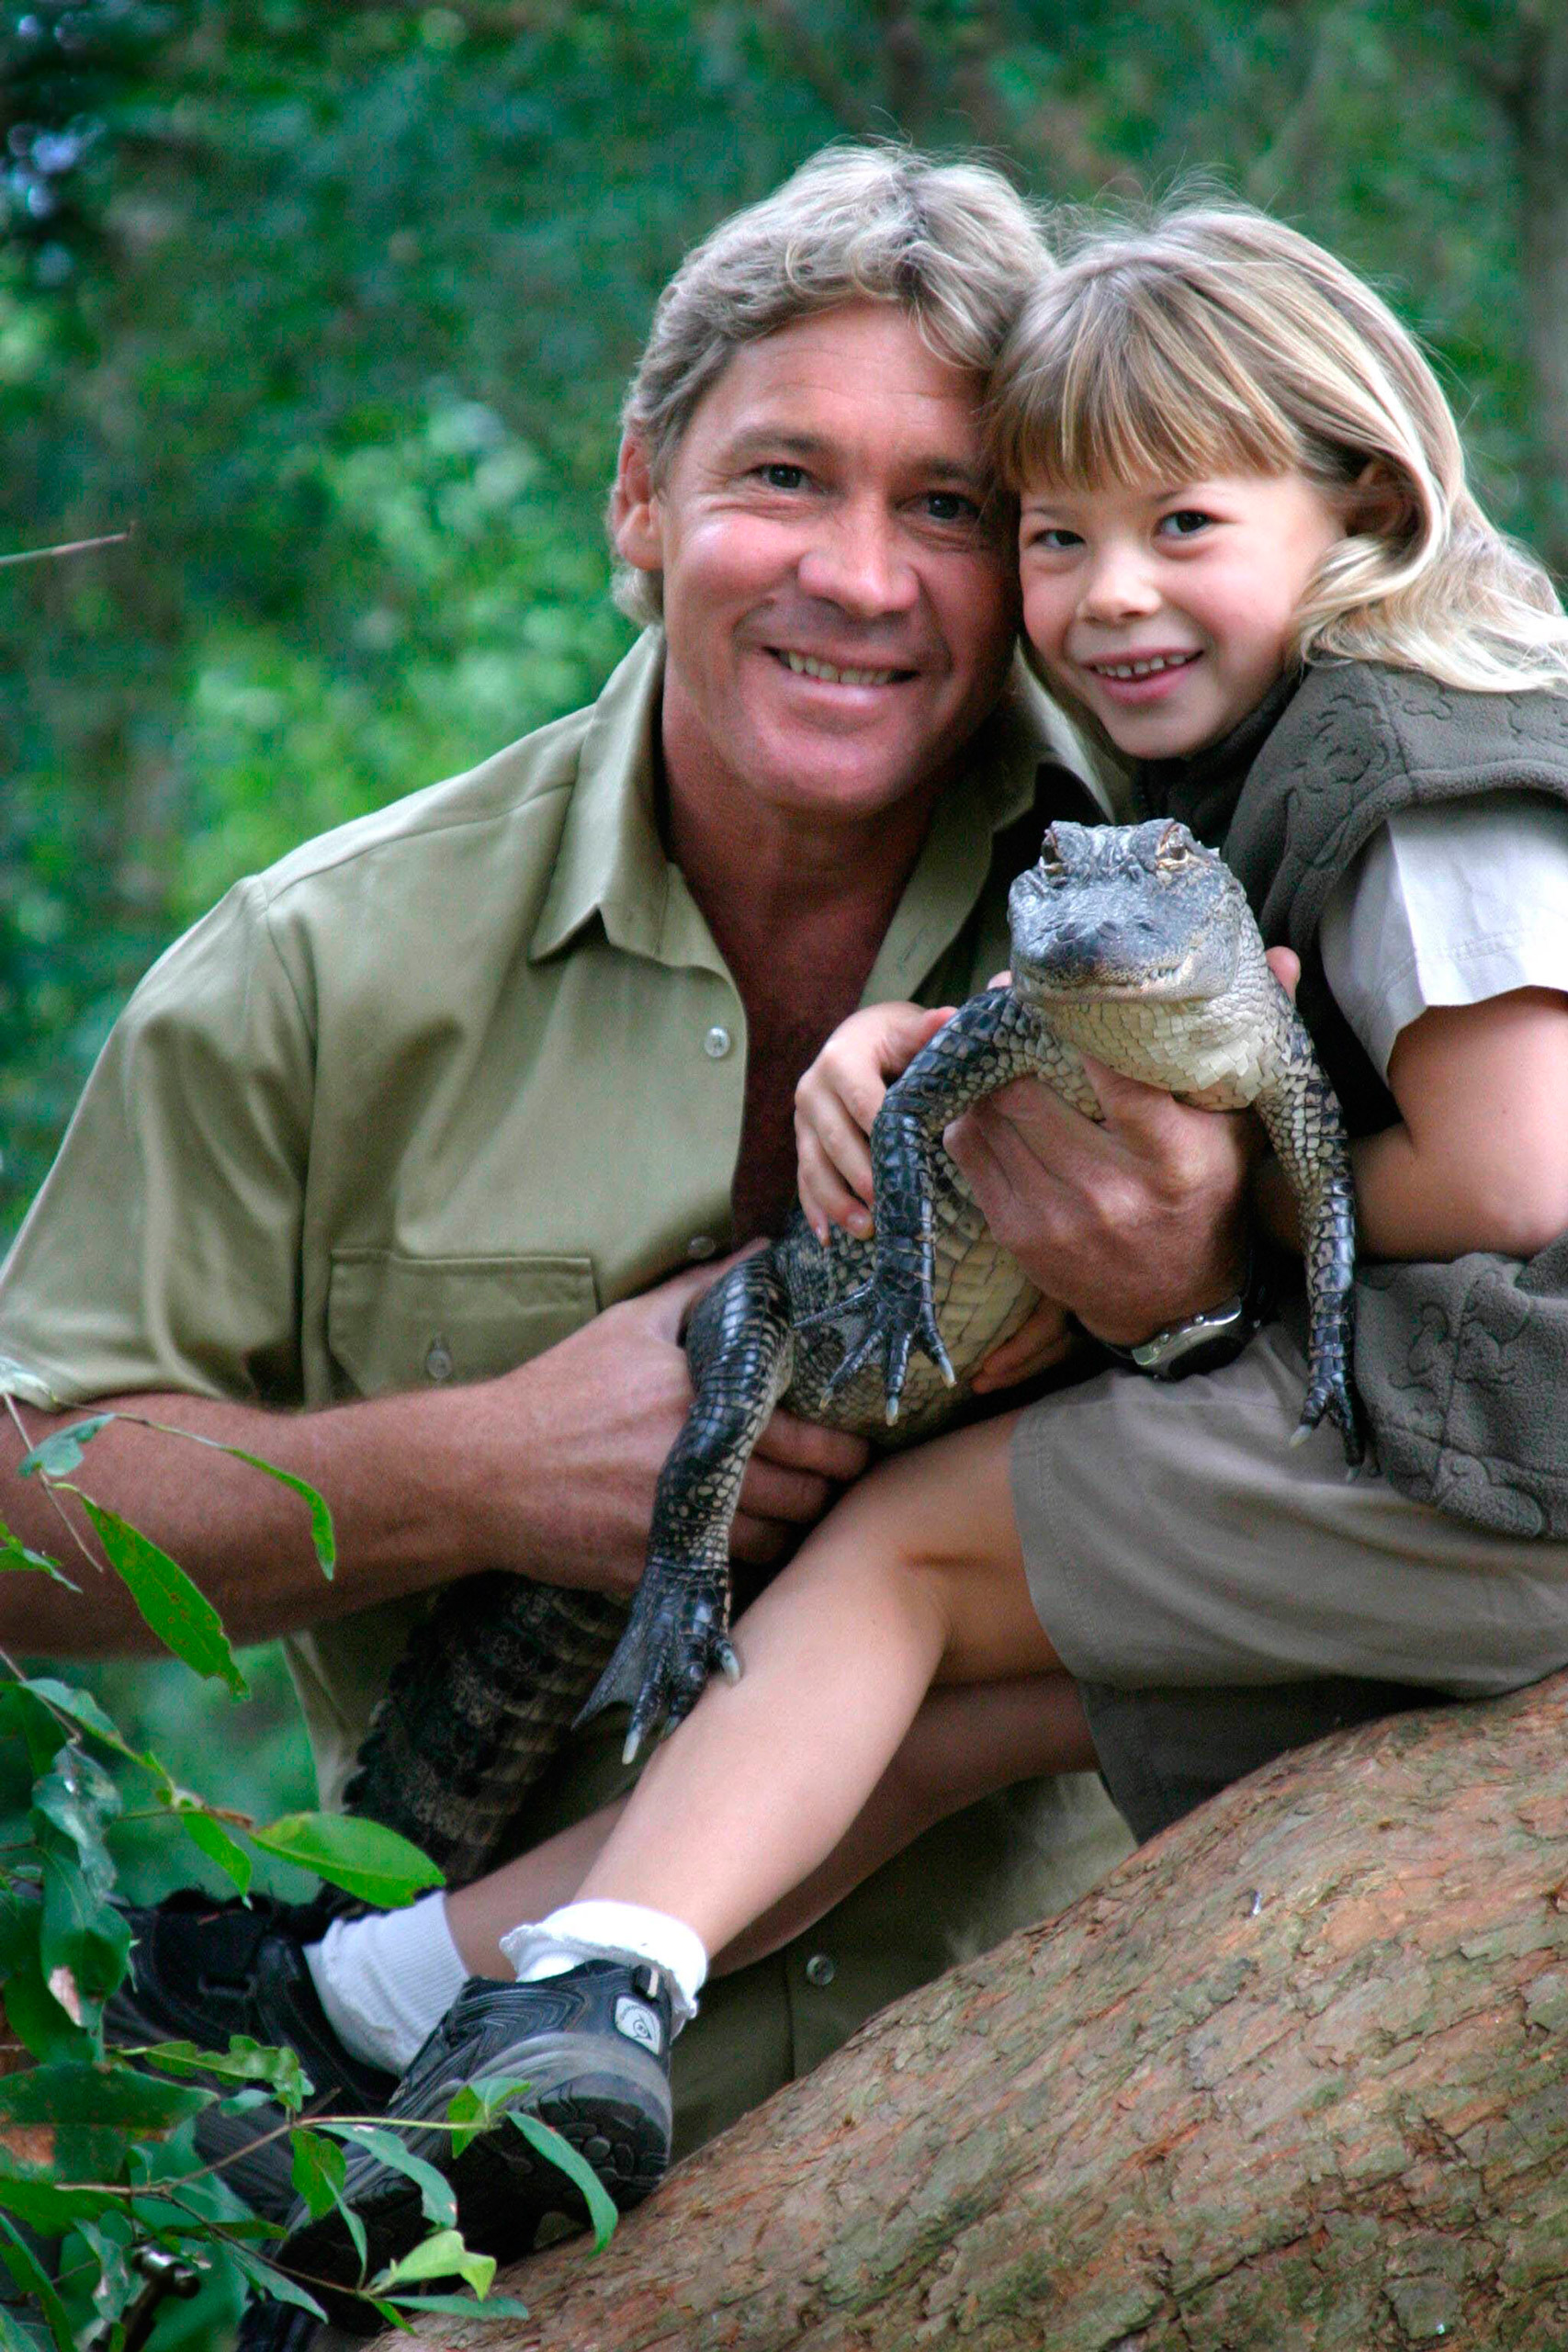 SUNSHINE COAST, AUSTRALIA - JUNE 25, 2005: (EUROPE AND AUSTRALASIA OUT) Steve Irwin with his daughter, Bindi Irwin, and a 3-year-old alligator called 'Russ' at Australia Zoo. (Photo by Newspix/Getty Images)